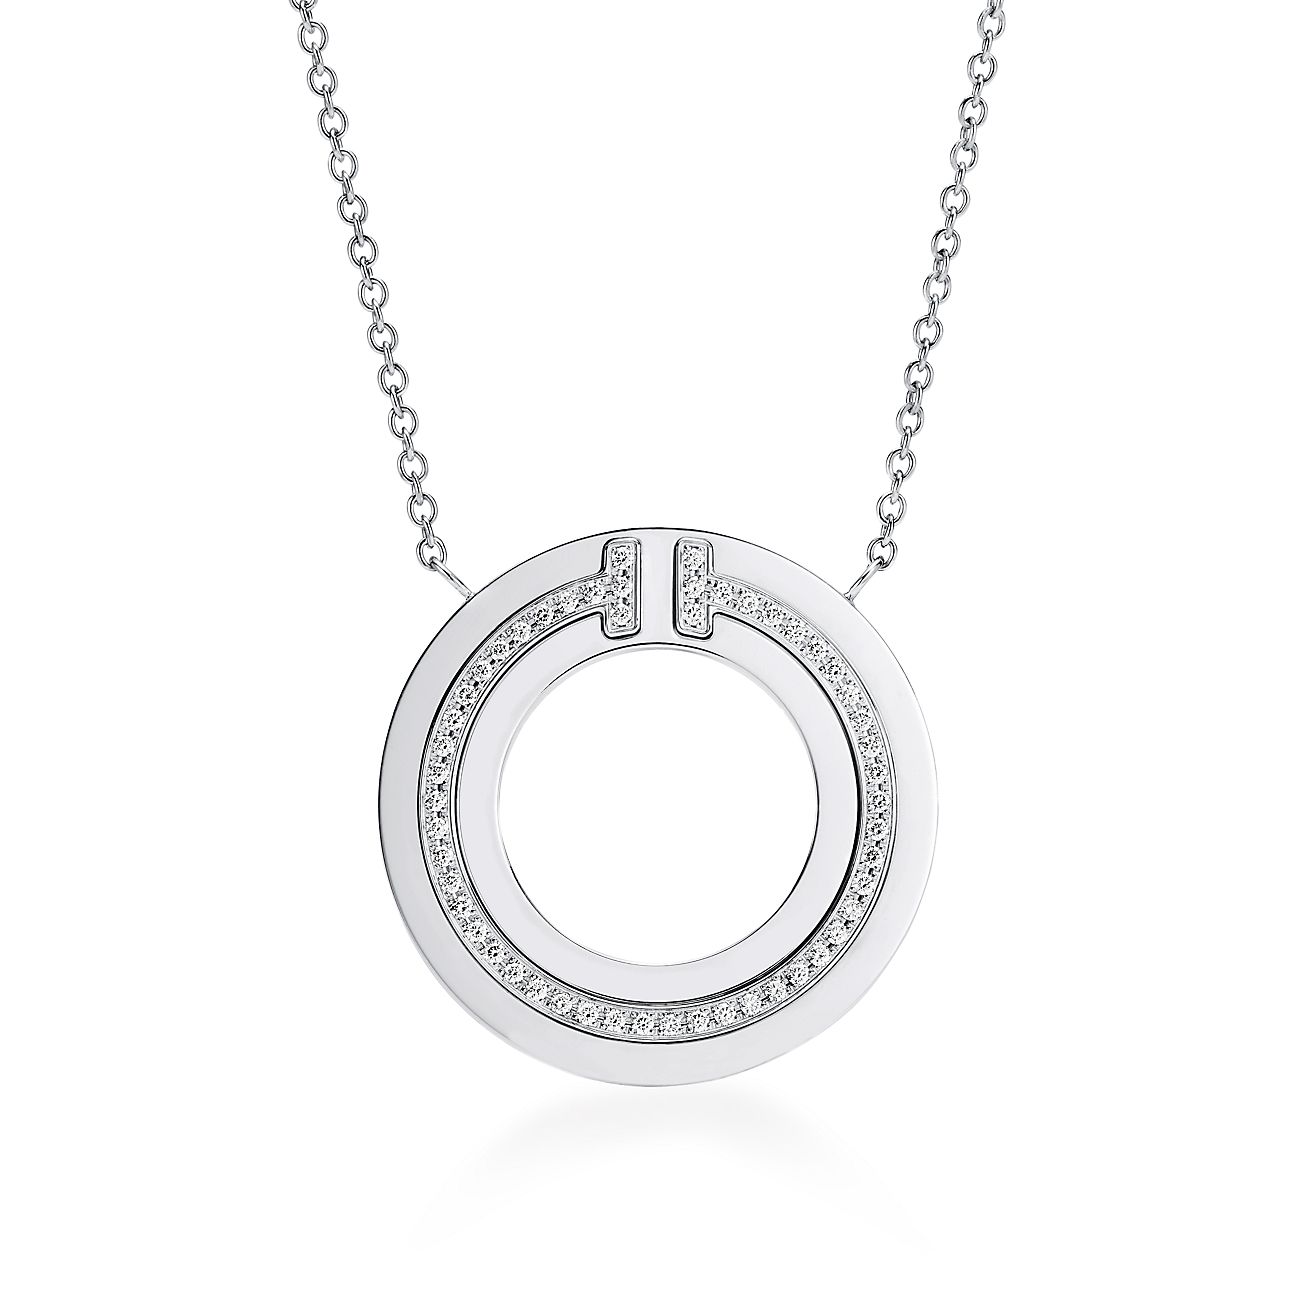 Tiffany Edge Circle Pendant in Platinum and Yellow Gold with Diamonds,  Small | Tiffany & Co.